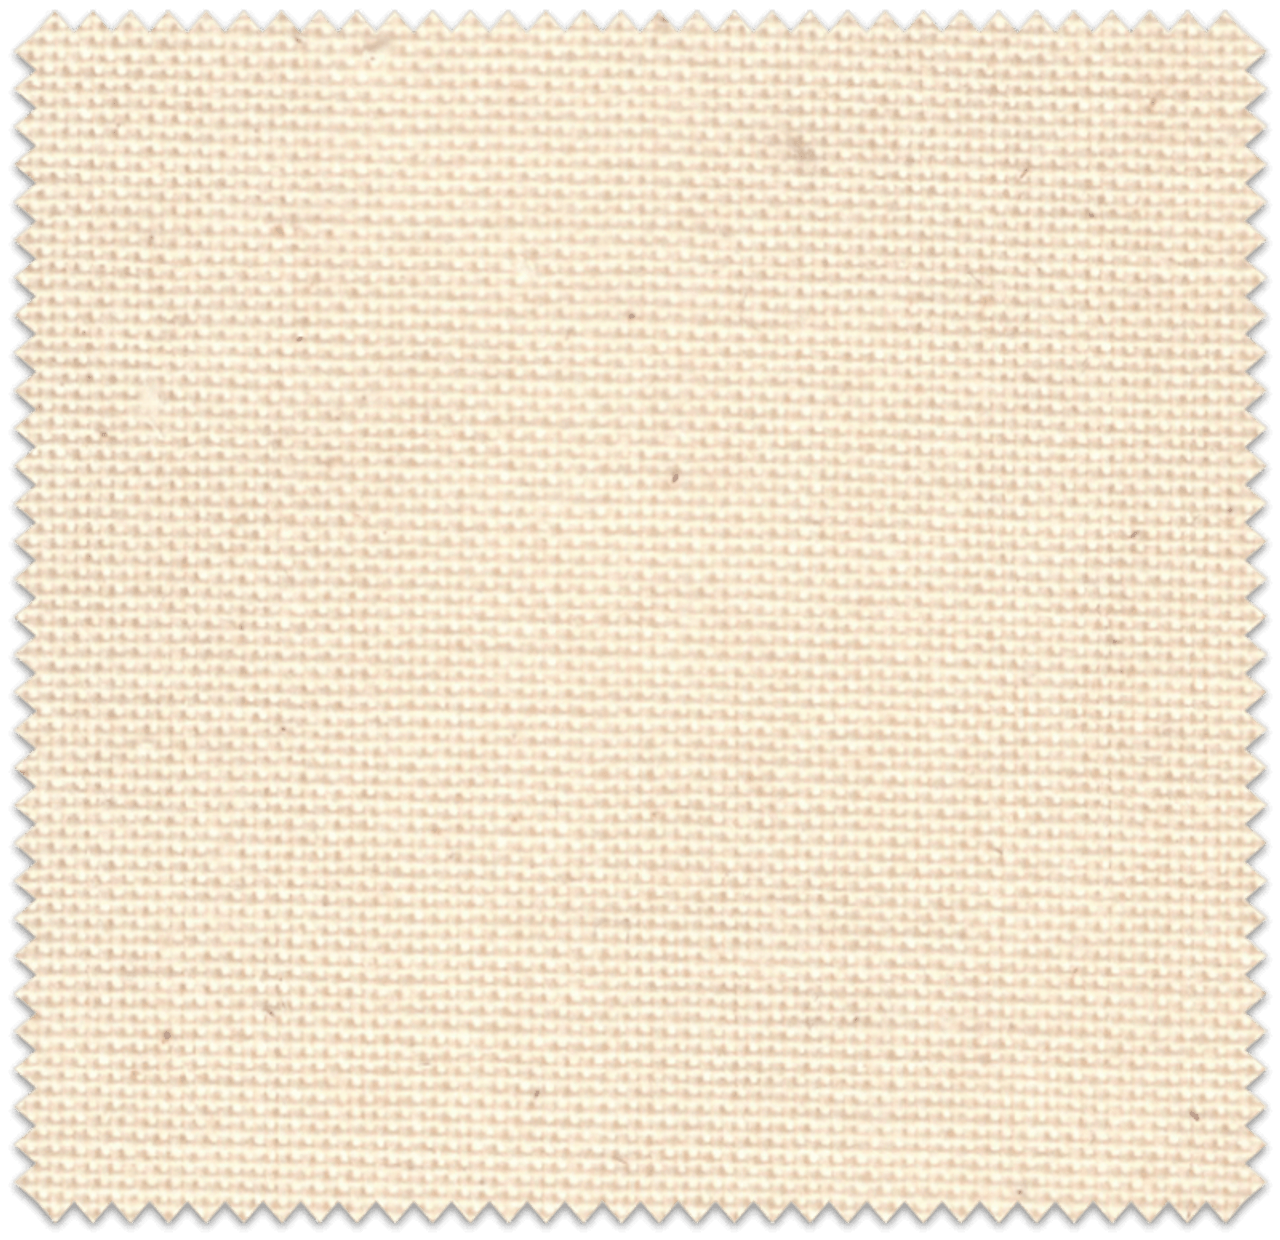 Natural Duck Canvas - 11.5 oz - 25 Yard Roll - Ideal for Artist Canvas